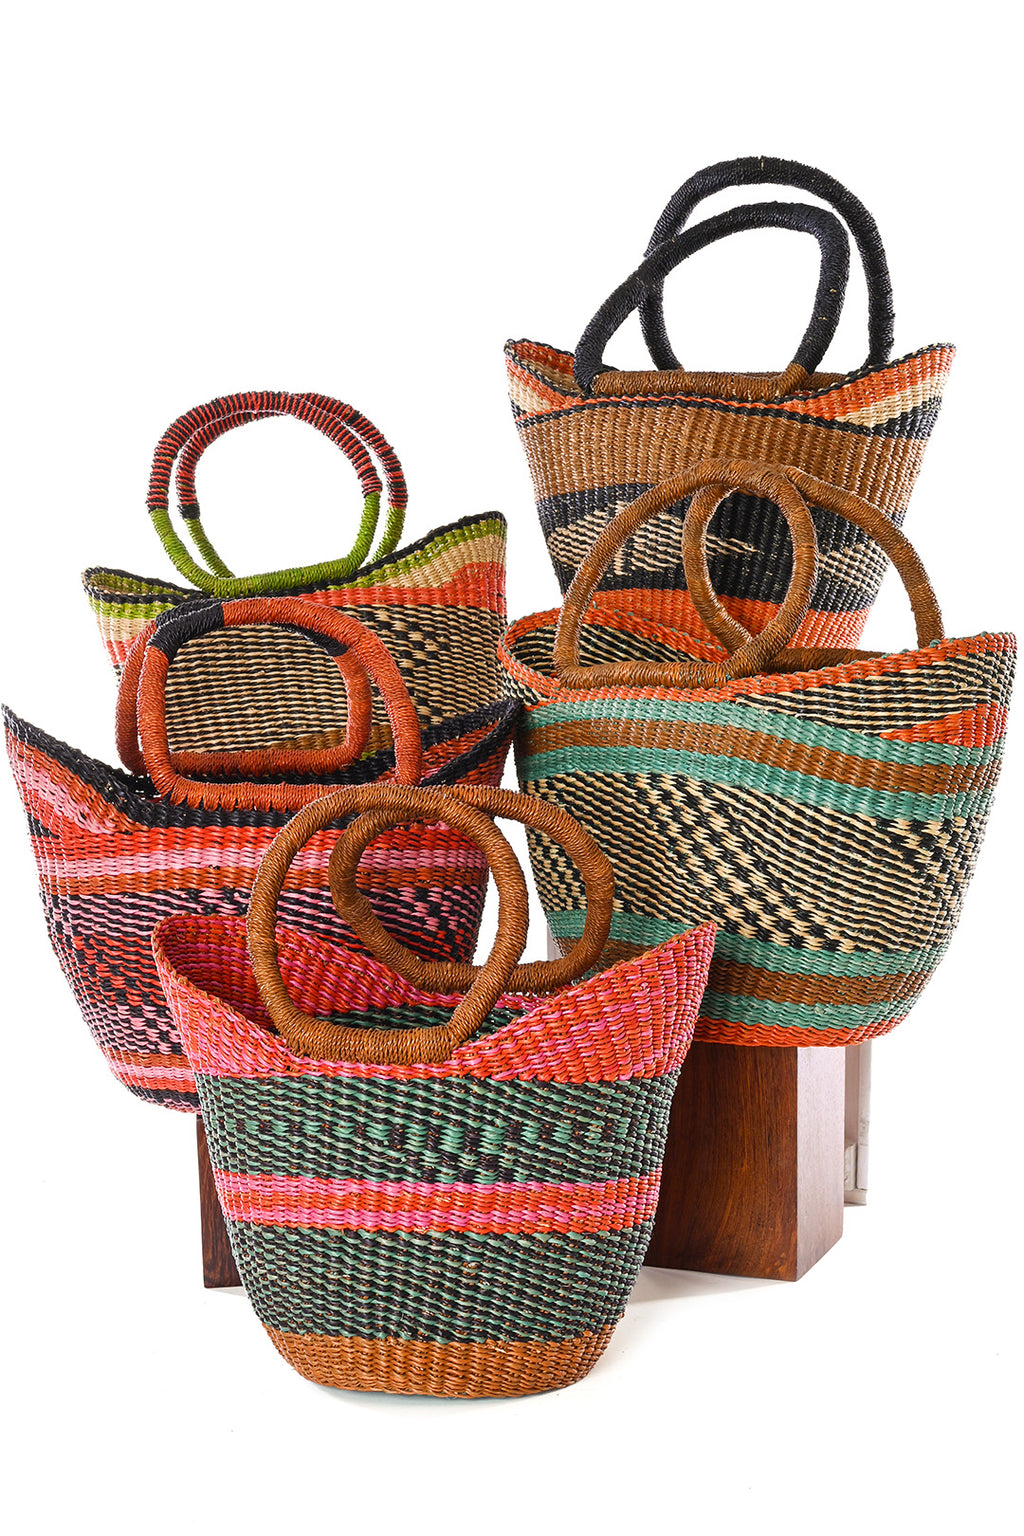 Assorted Colorful Petite Shopper from Ghana